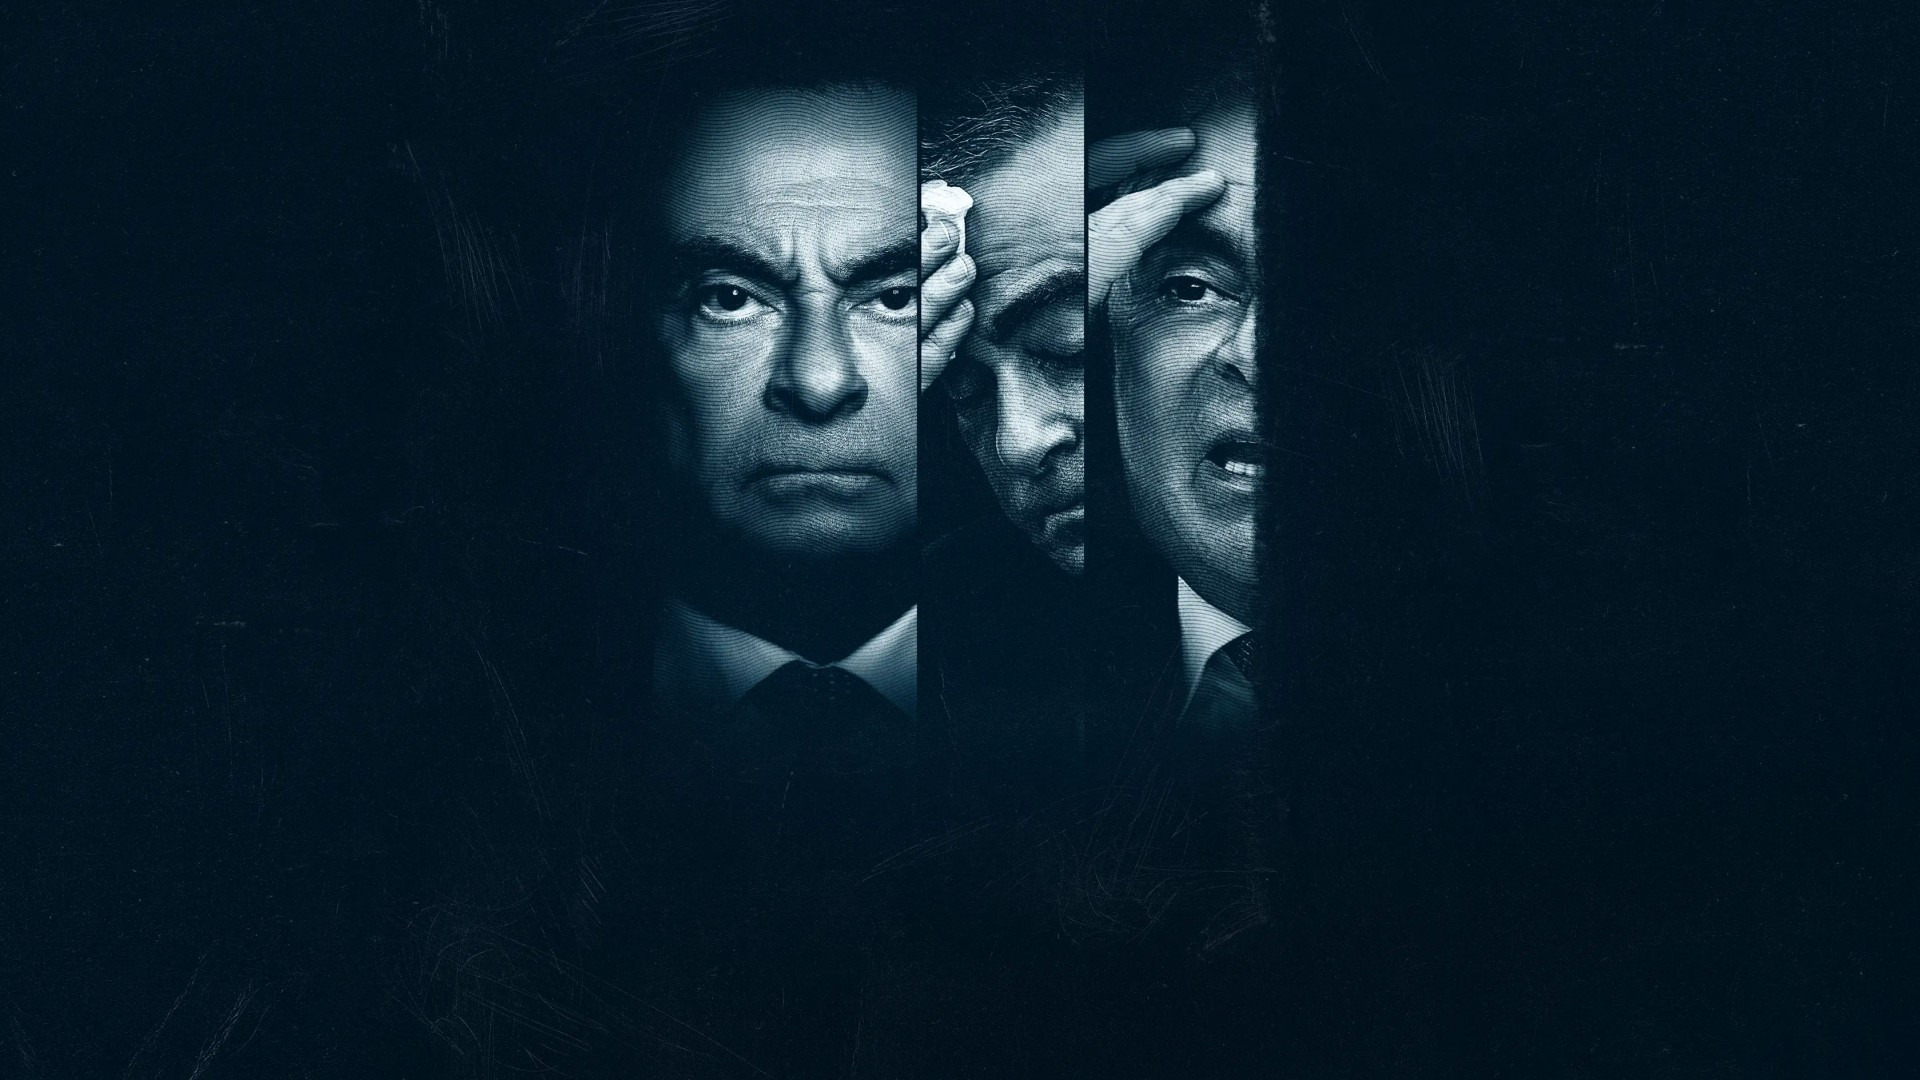 Show Wanted: The Escape of Carlos Ghosn